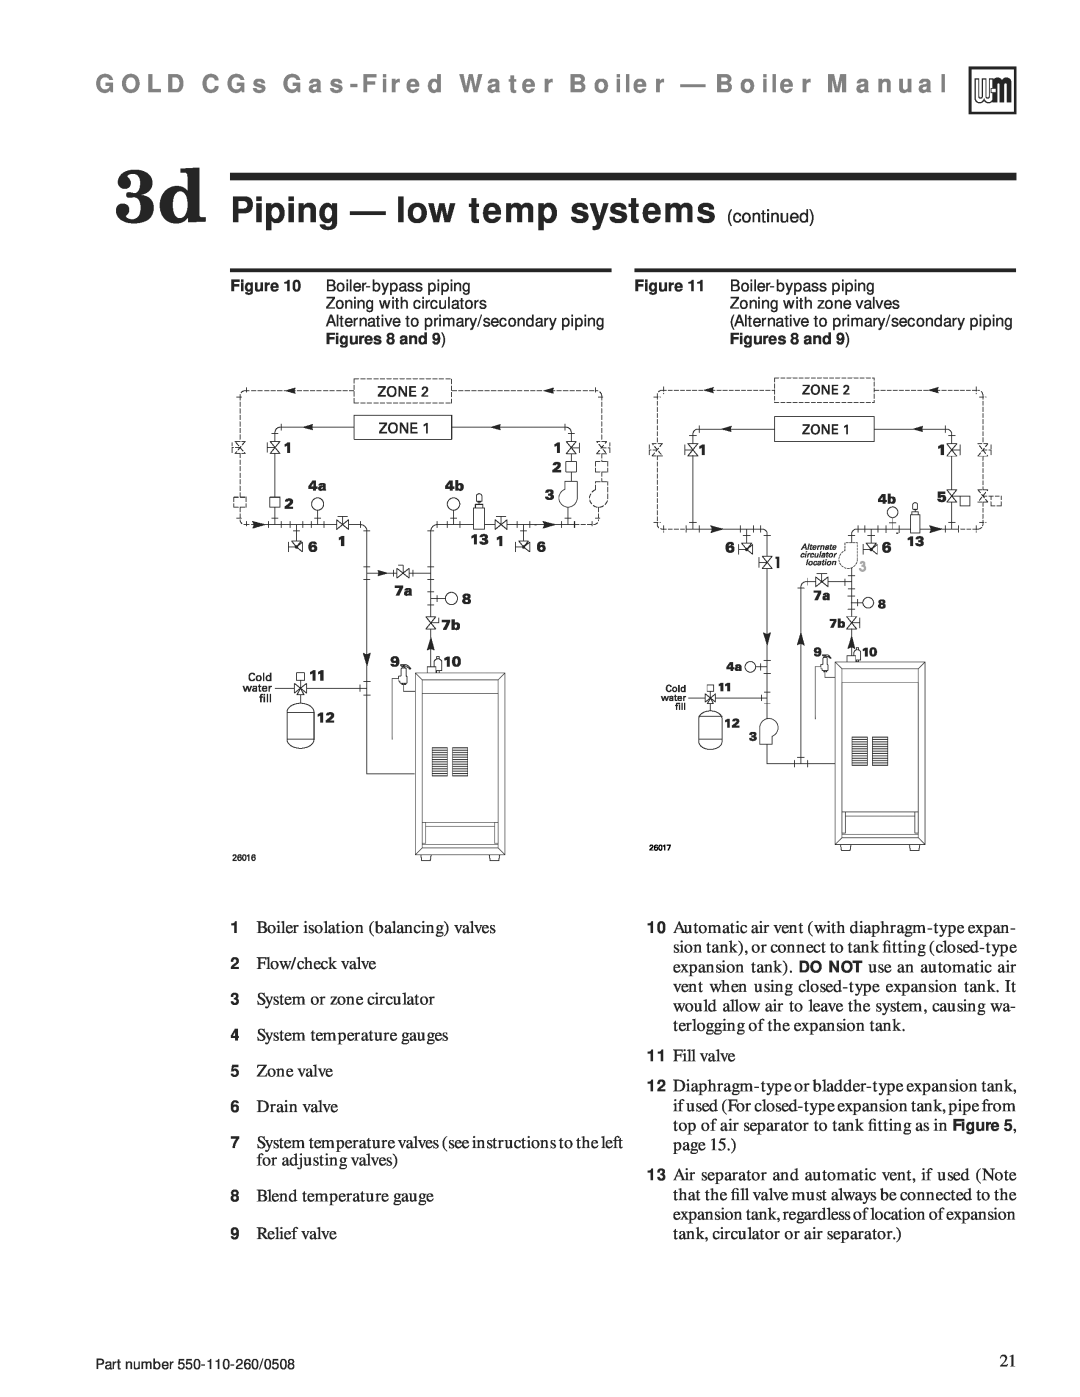 Weil-McLain 550-110-260/0508 manual 3d Piping — low temp systems continued, GOLD CGs Gas-FiredWater Boiler — Boiler Manual 